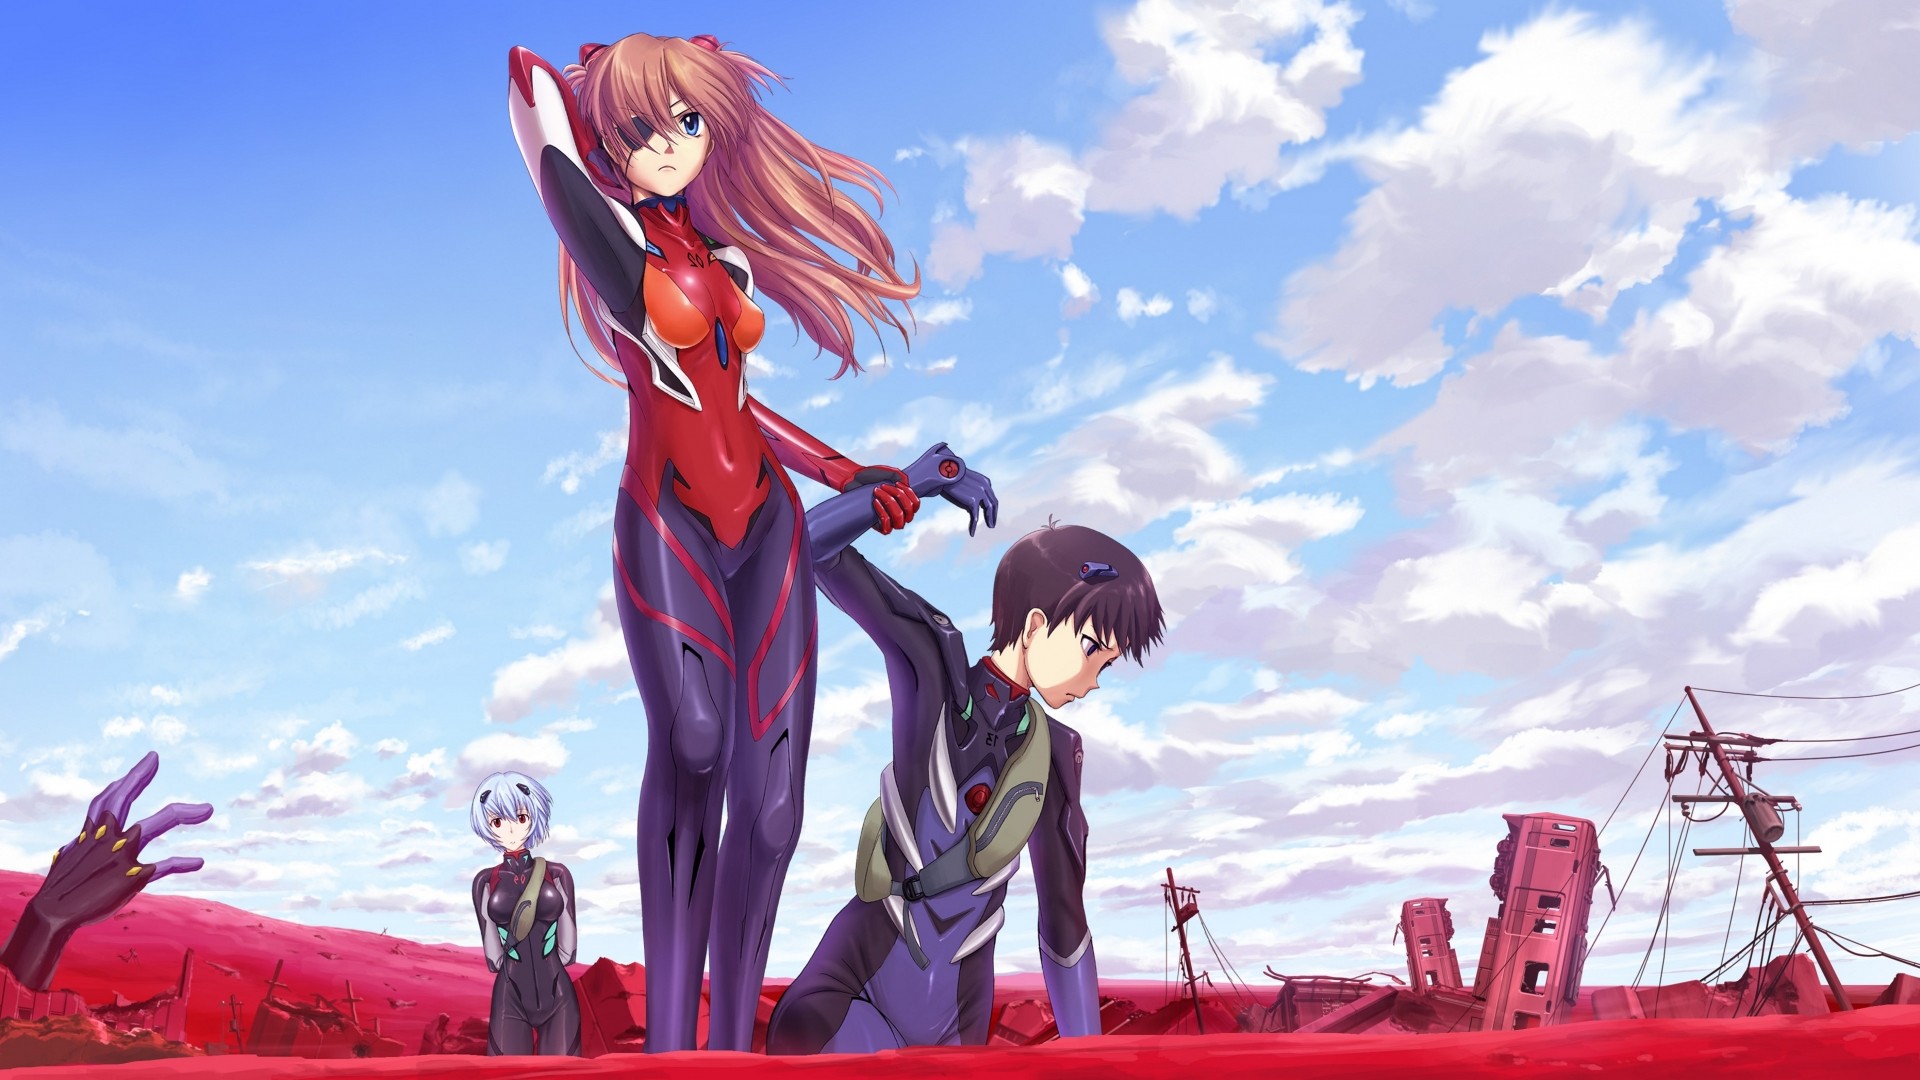 1920x1080 Download Neon Genesis Evangelion Rei Ayanami Asuka Langley Good Funny Anime  Wallpaper In Many Resolutions